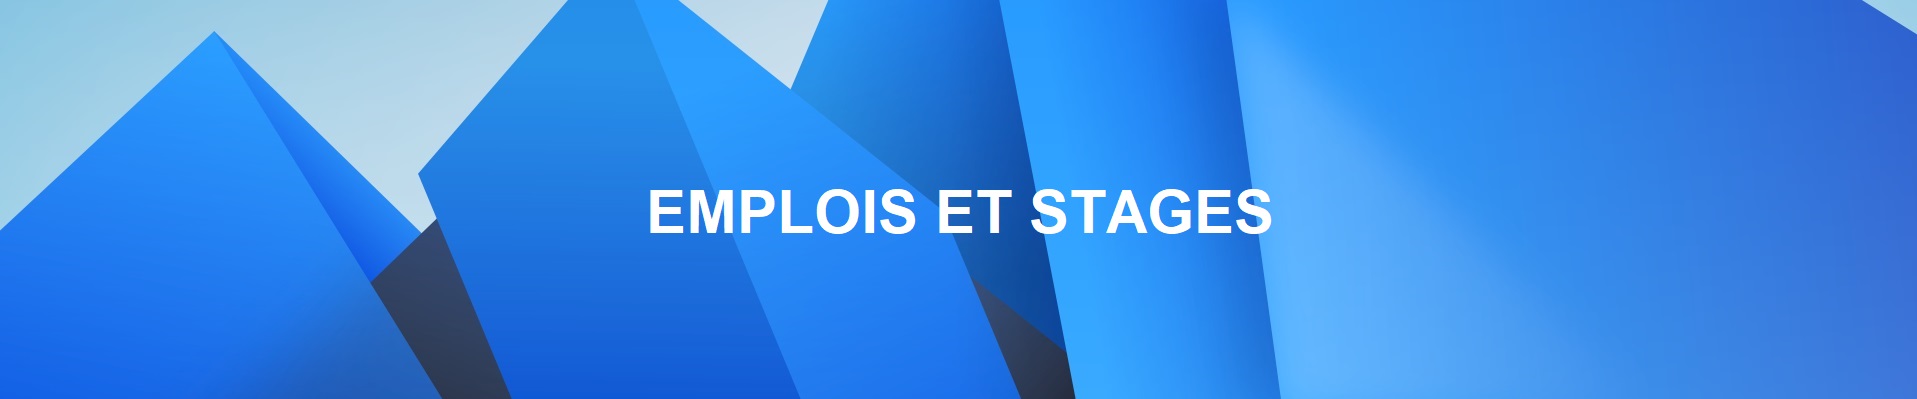 EMPLOIS & STAGES.jpg